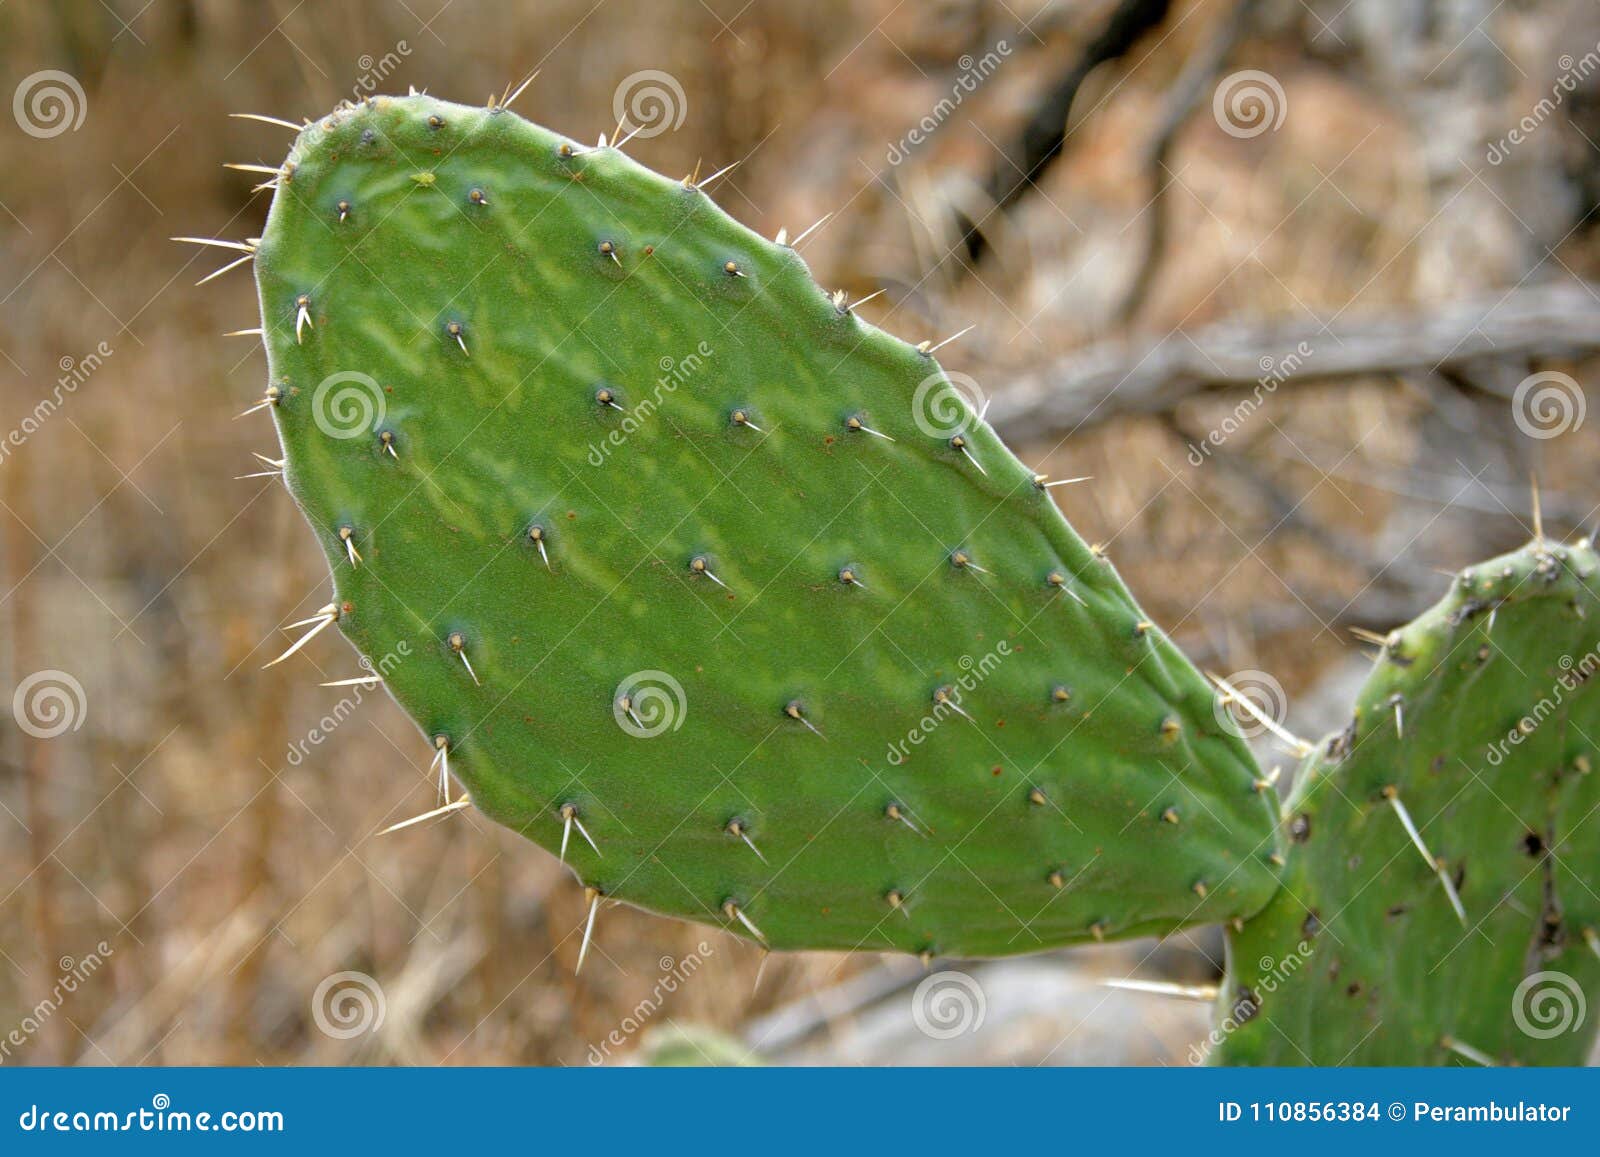 VIEW of LARGE CACTUS LEAF stock photo. Image of background - 110856384